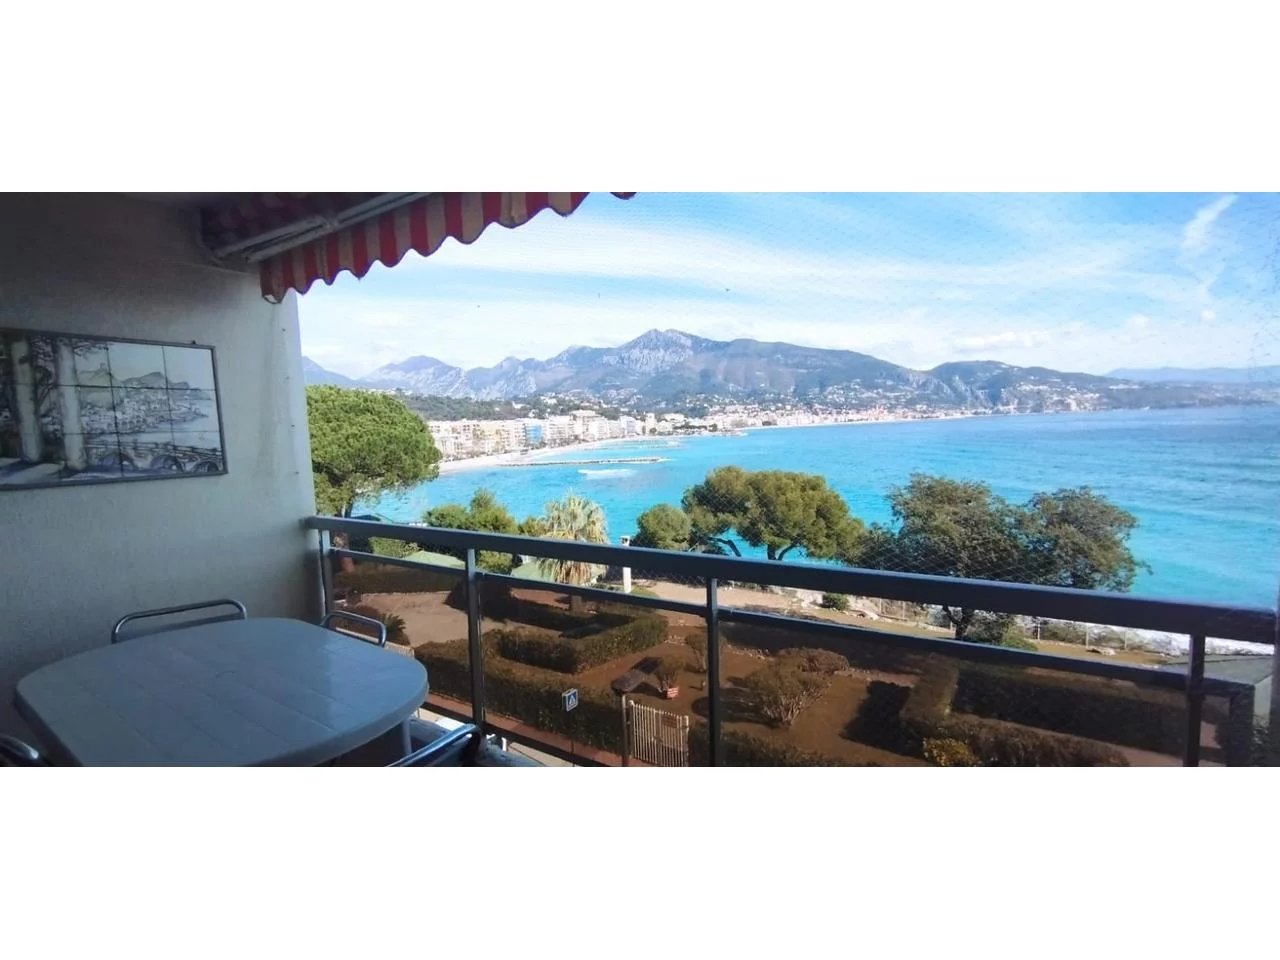 Appartement  2 Rooms 57.72m2  for sale   695 000 €